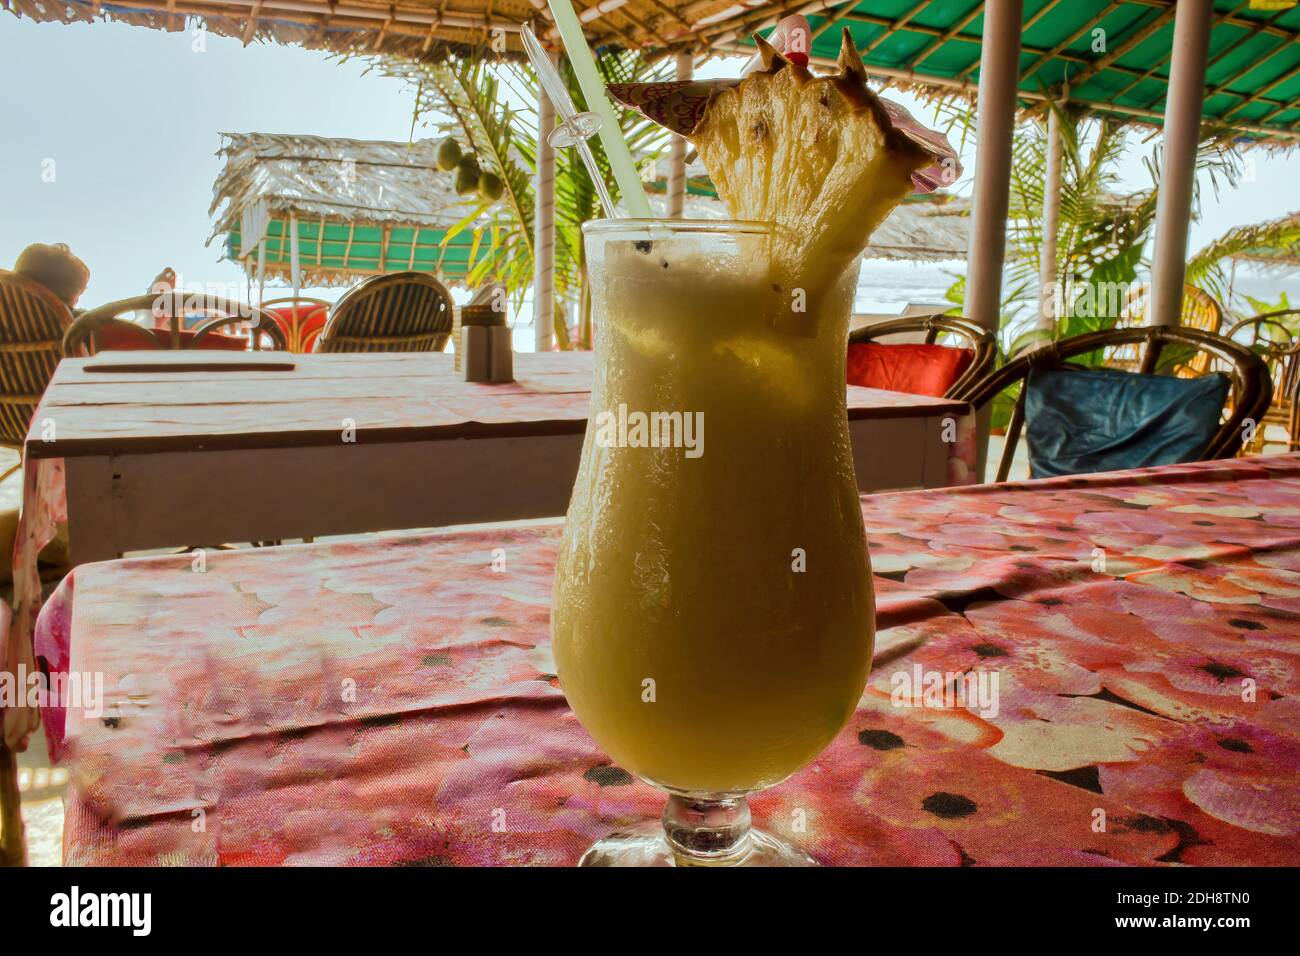 Pina colada cocktail with a pineapple garnish and a plastic straw on a table in an exotic location in Goa, India. Stock Photo